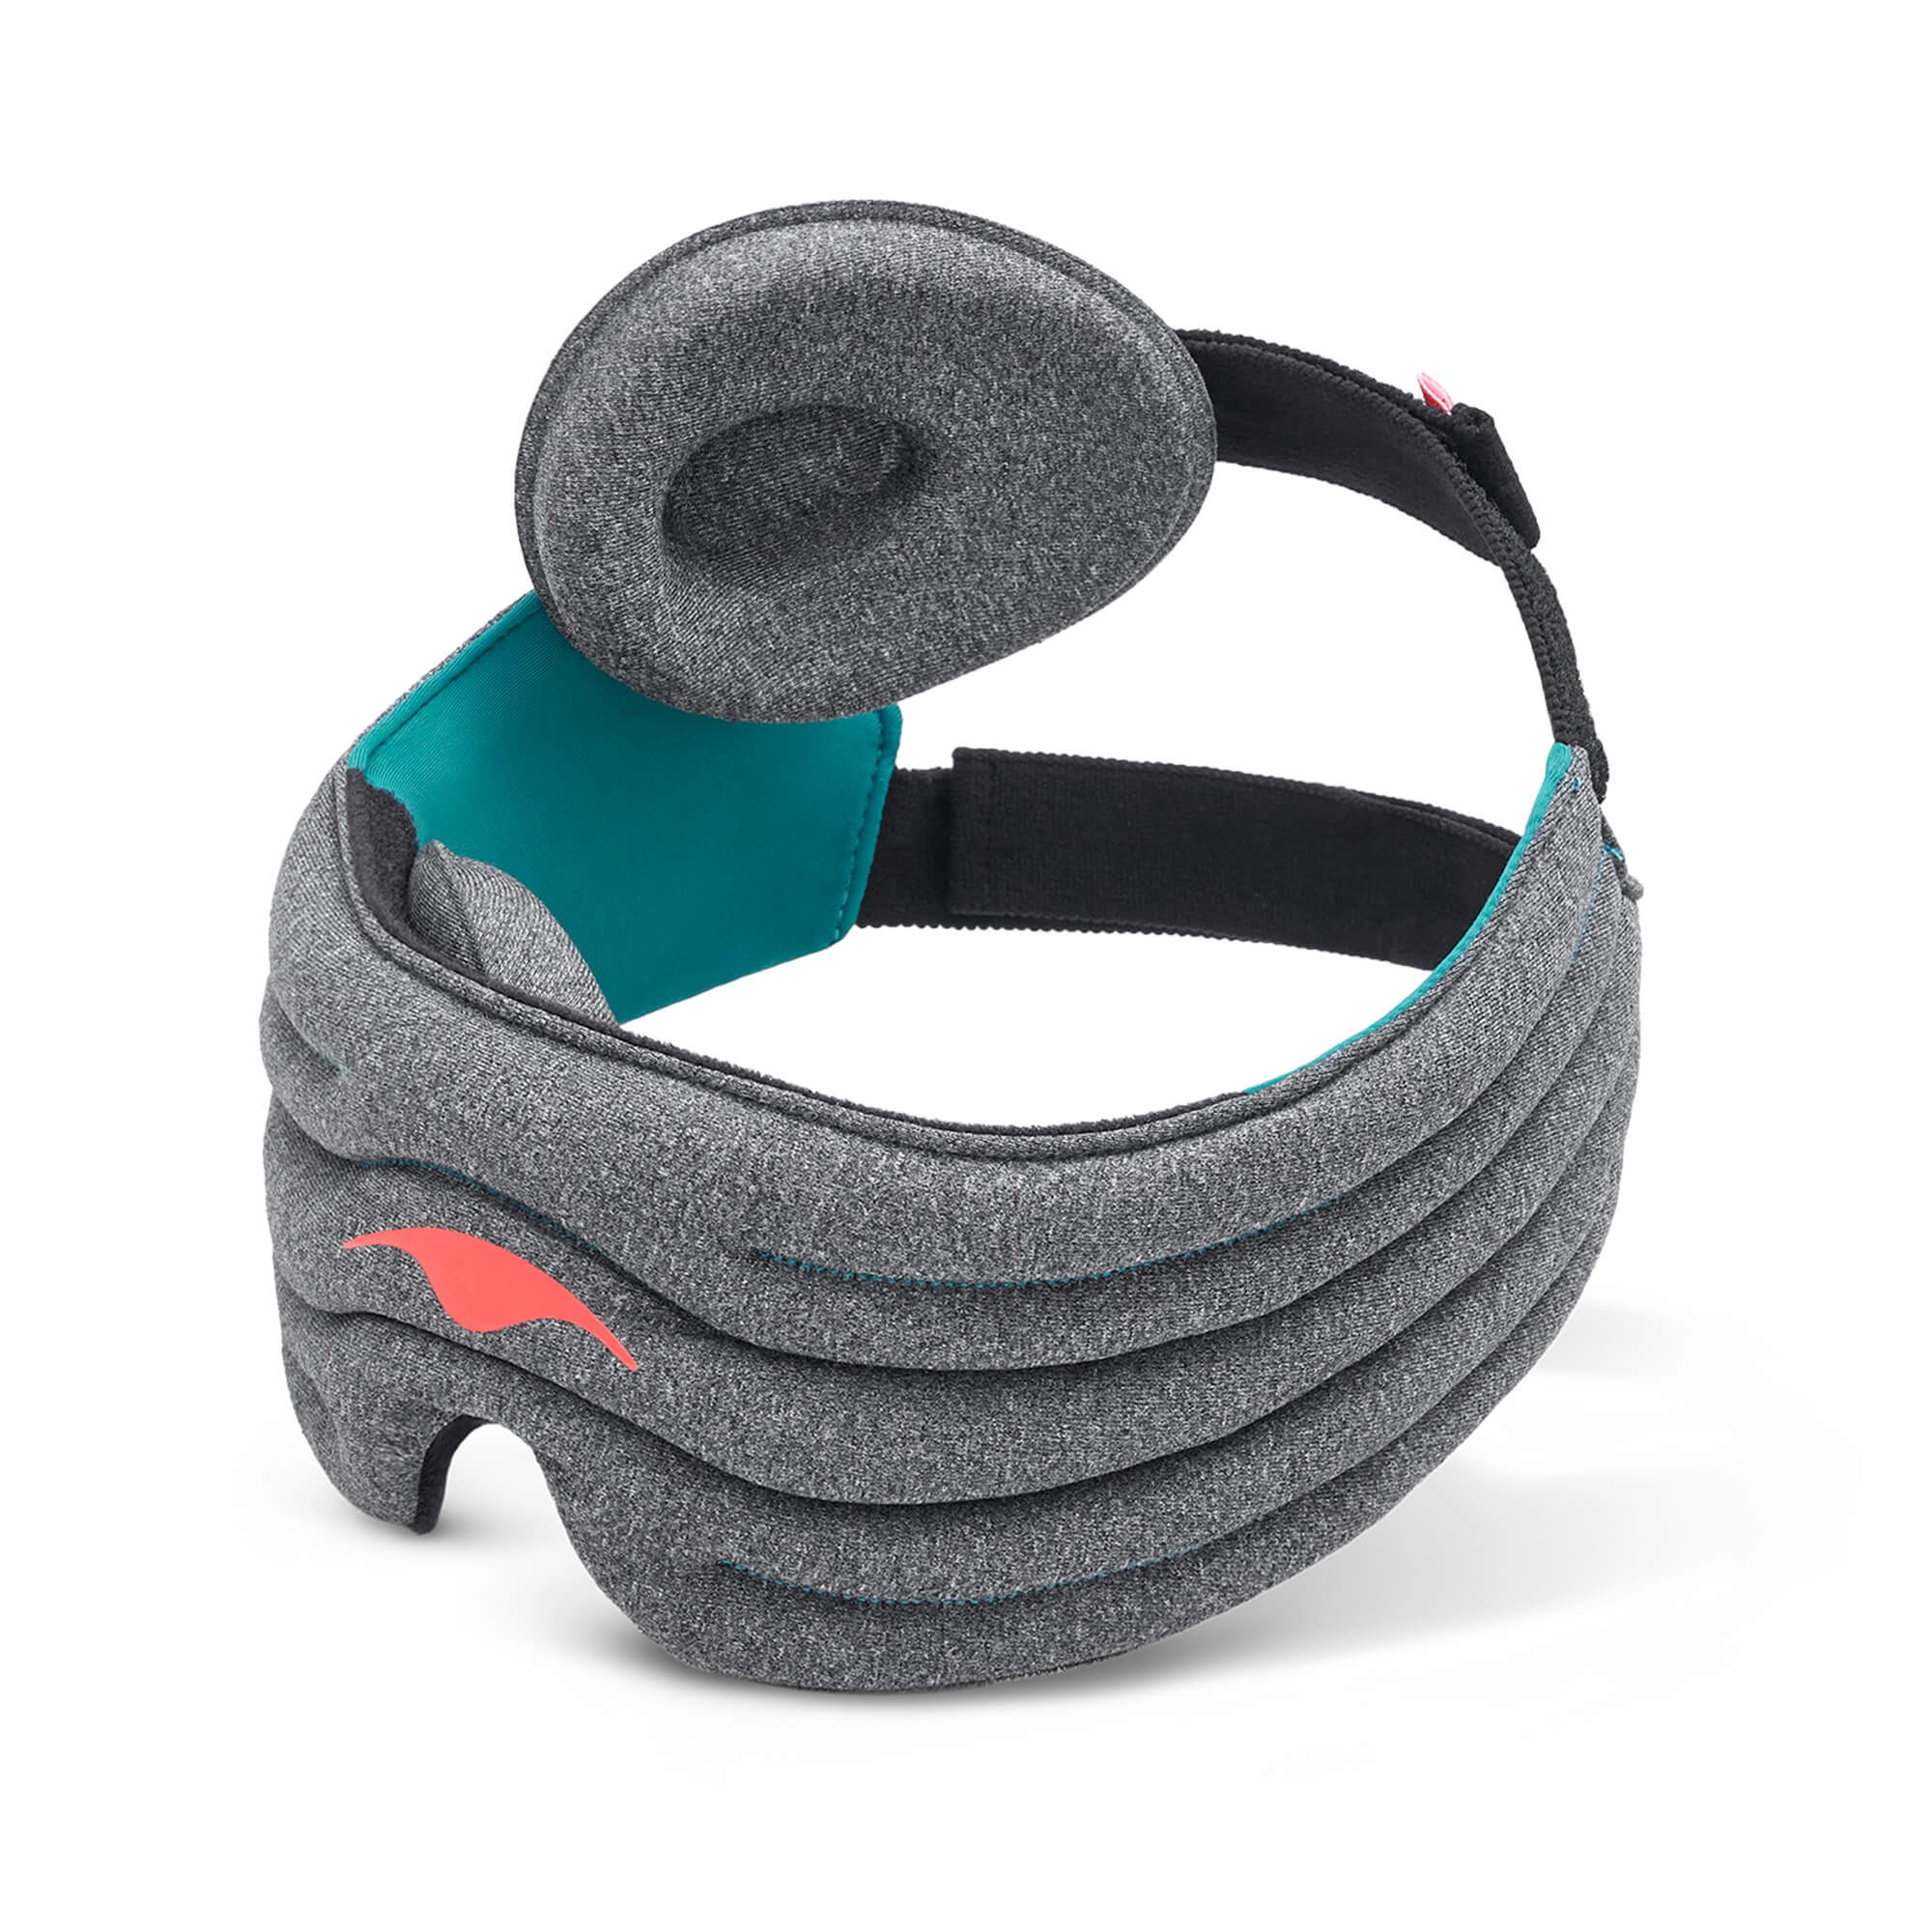 A weighted sleep mask with one tapered eye cup attached to the upper strap.